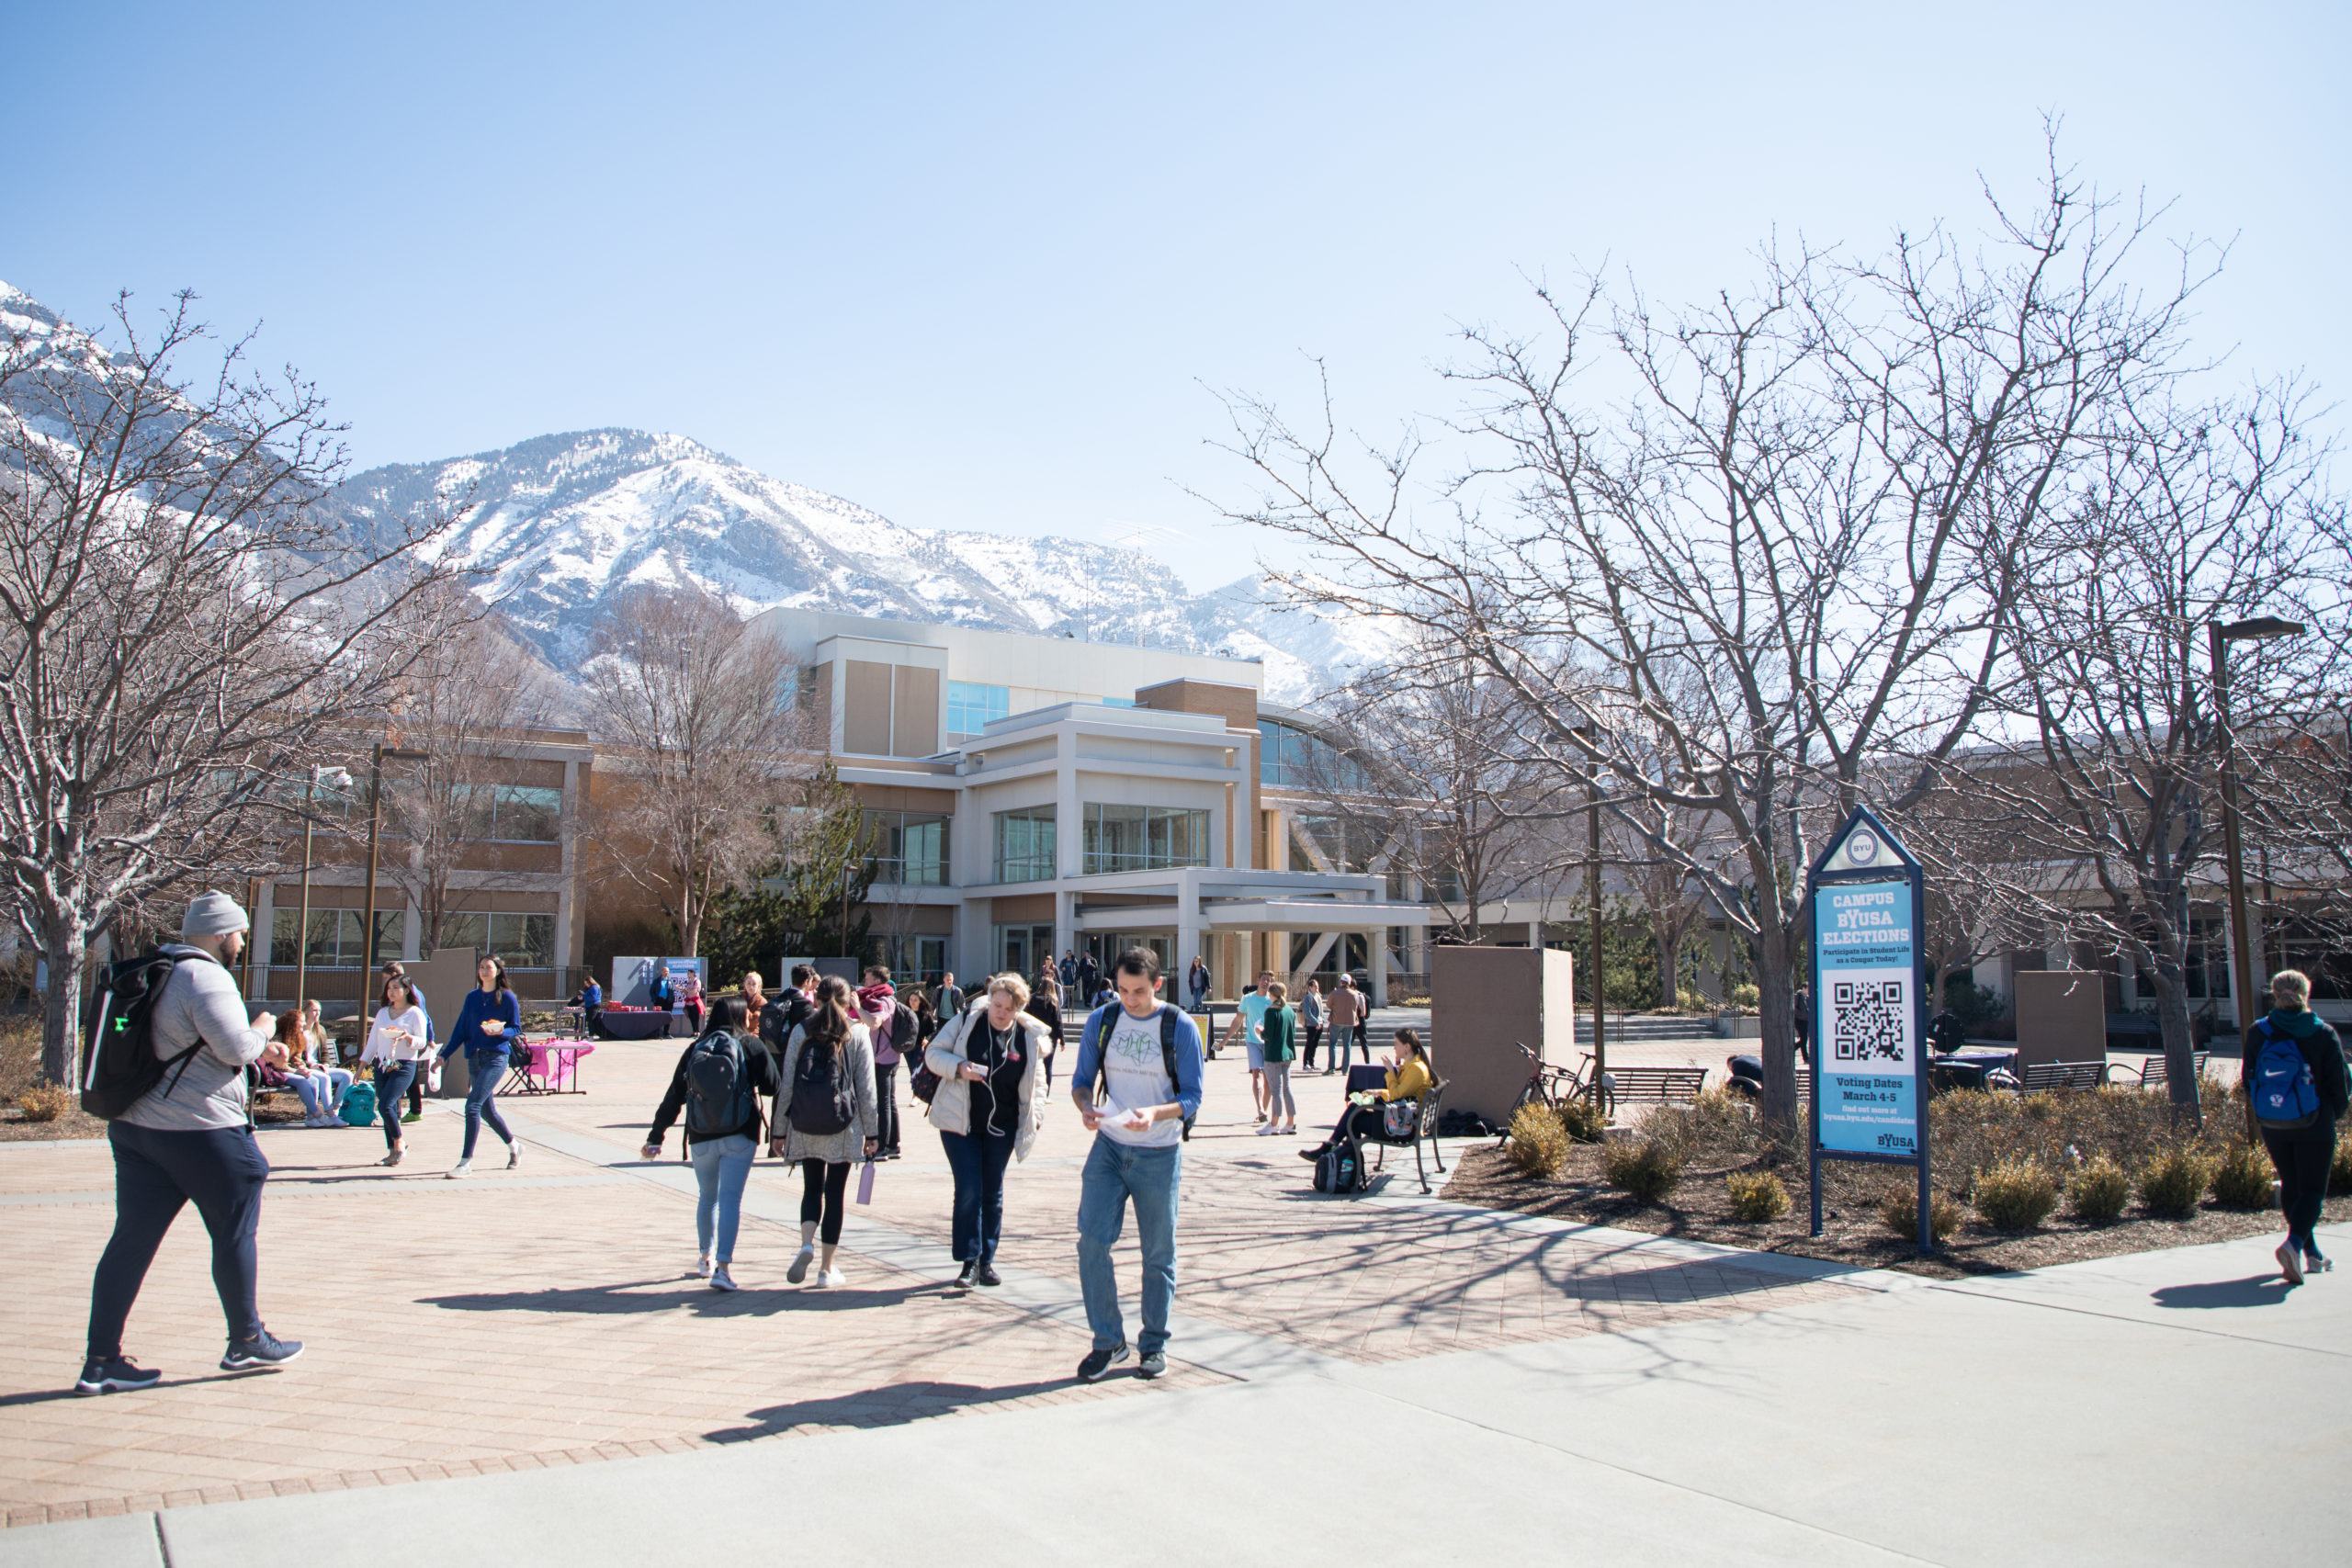 byu-says-decision-about-fall-semester-won-t-be-made-until-july-the-daily-universe